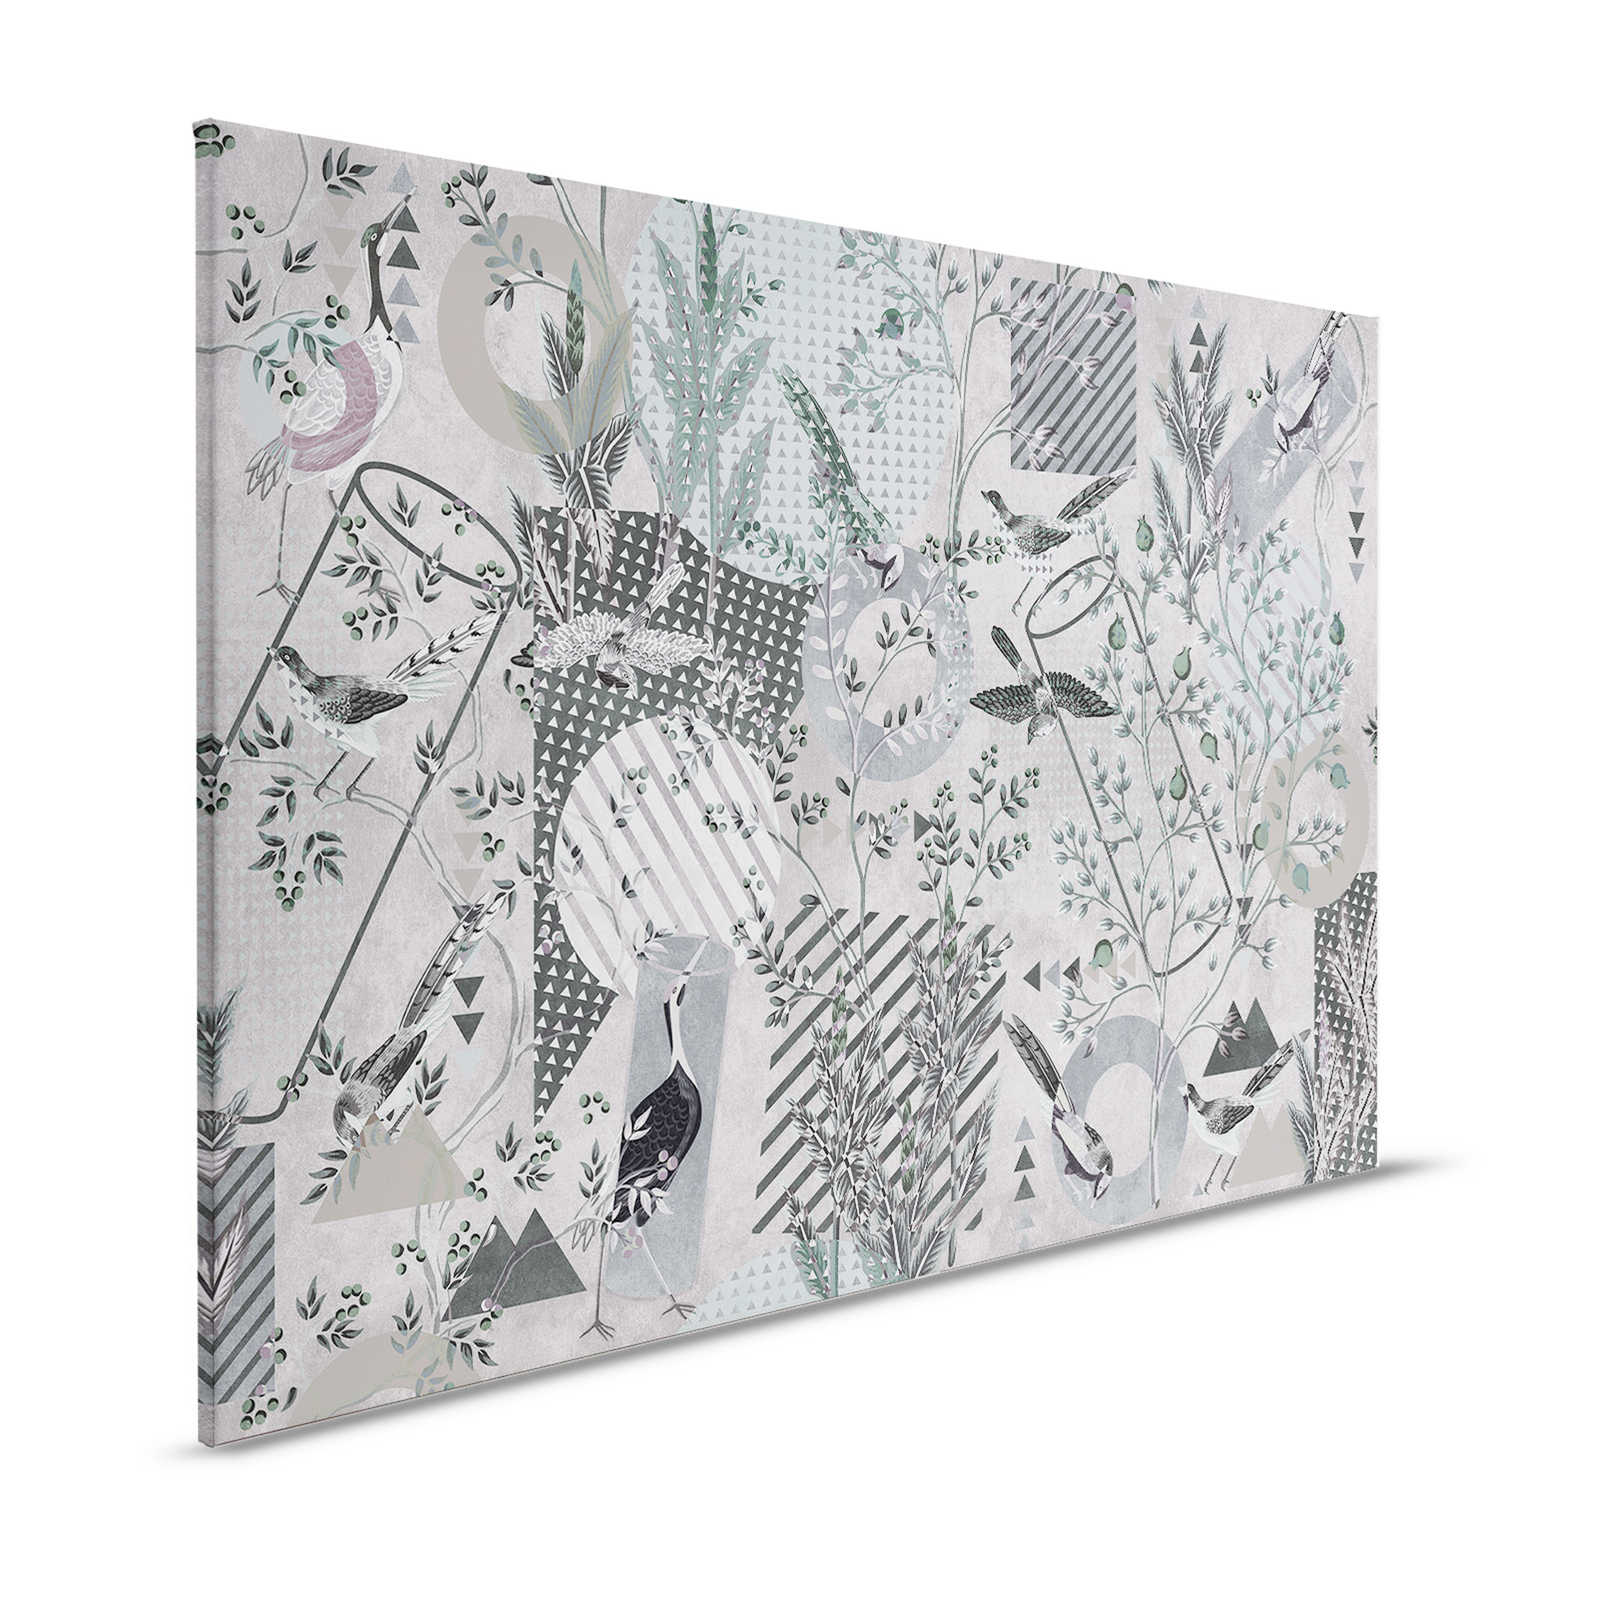 Birds Playgroude 1 - Canvas painting Grey Collage Birds & Patterns - 1.20 m x 0.80 m
